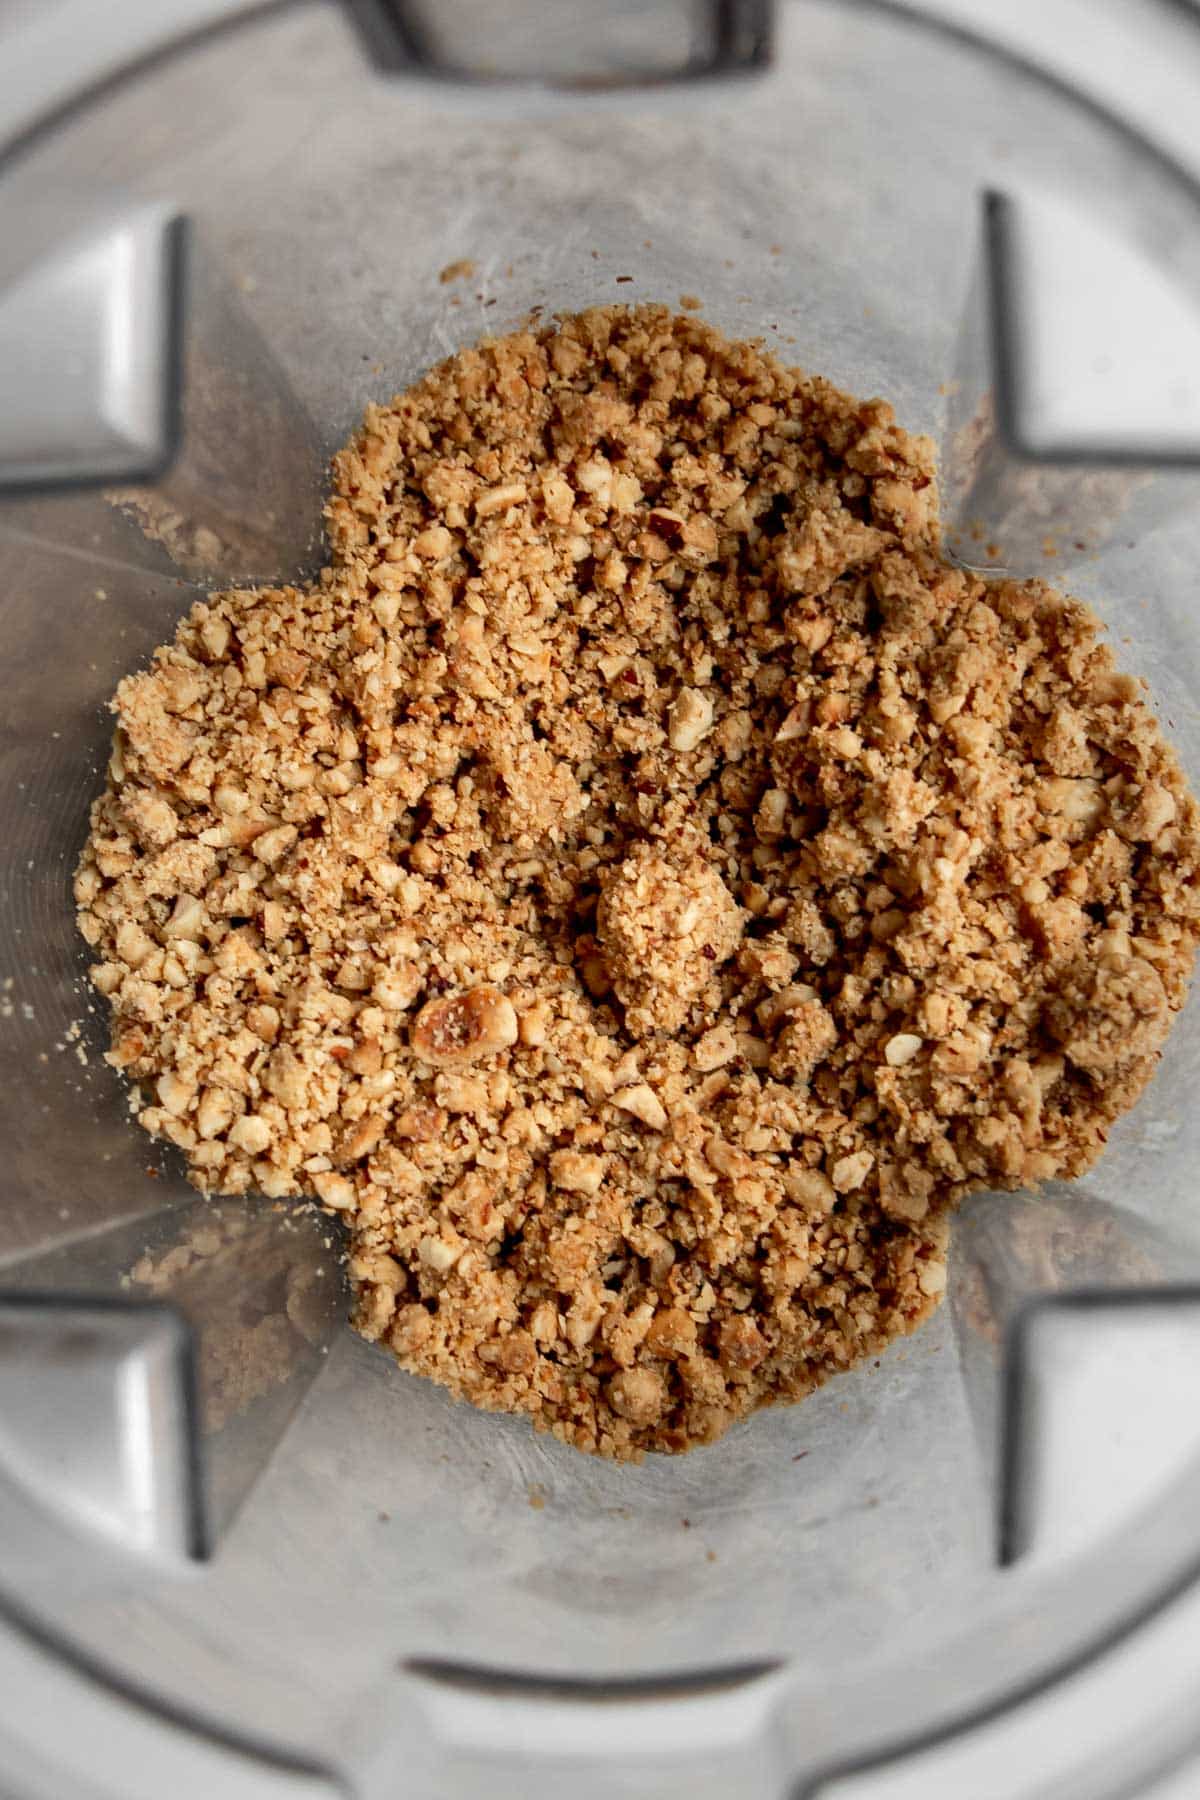 Crumbly hazelnut butter in a vitamix.